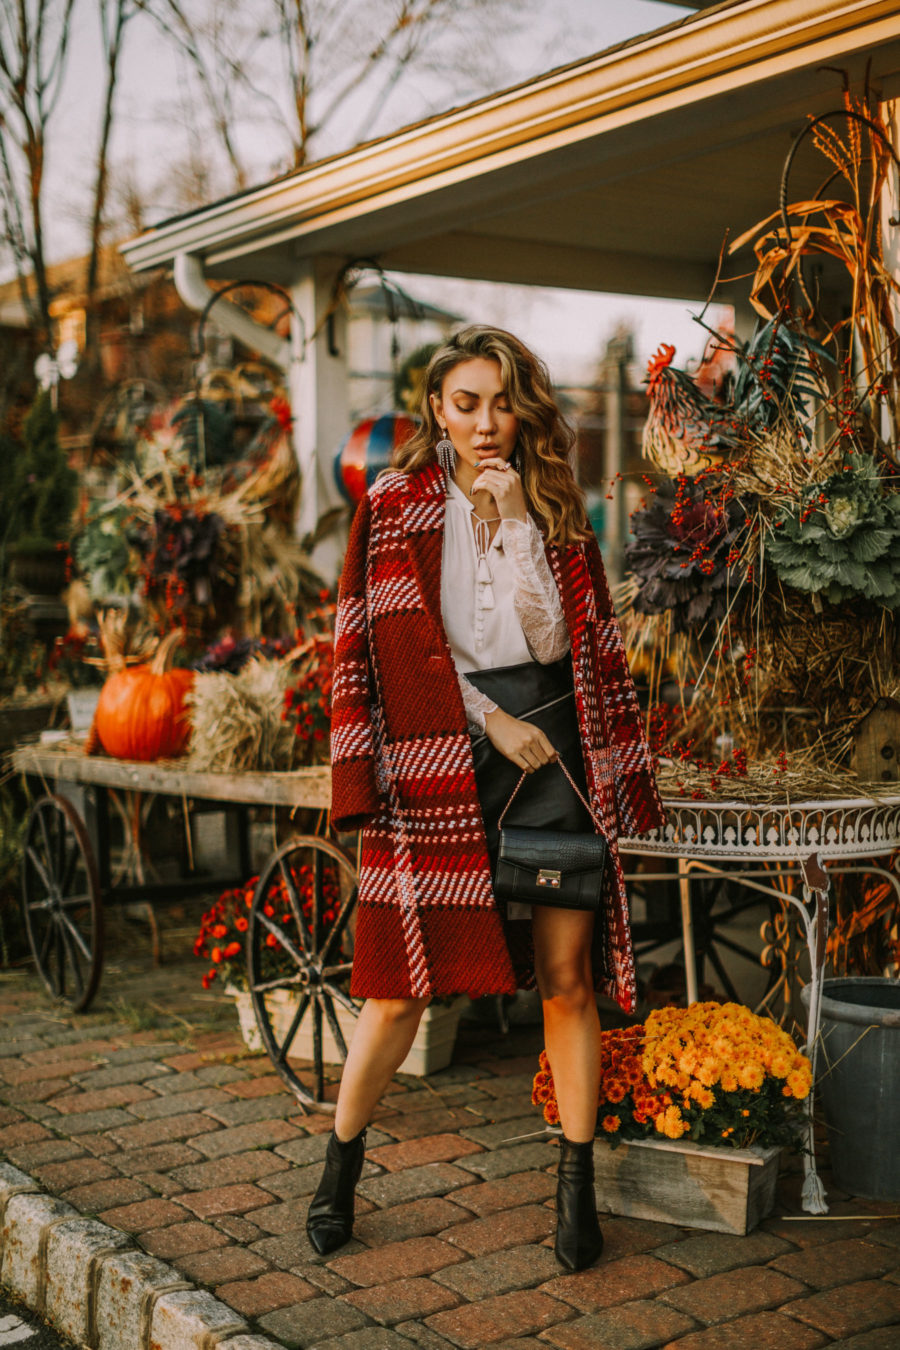 fashion blogger jessica wang shares chic christmas outfits for every day of the week in a plaid express coat and leather mini skirt // Notjessfashion.com